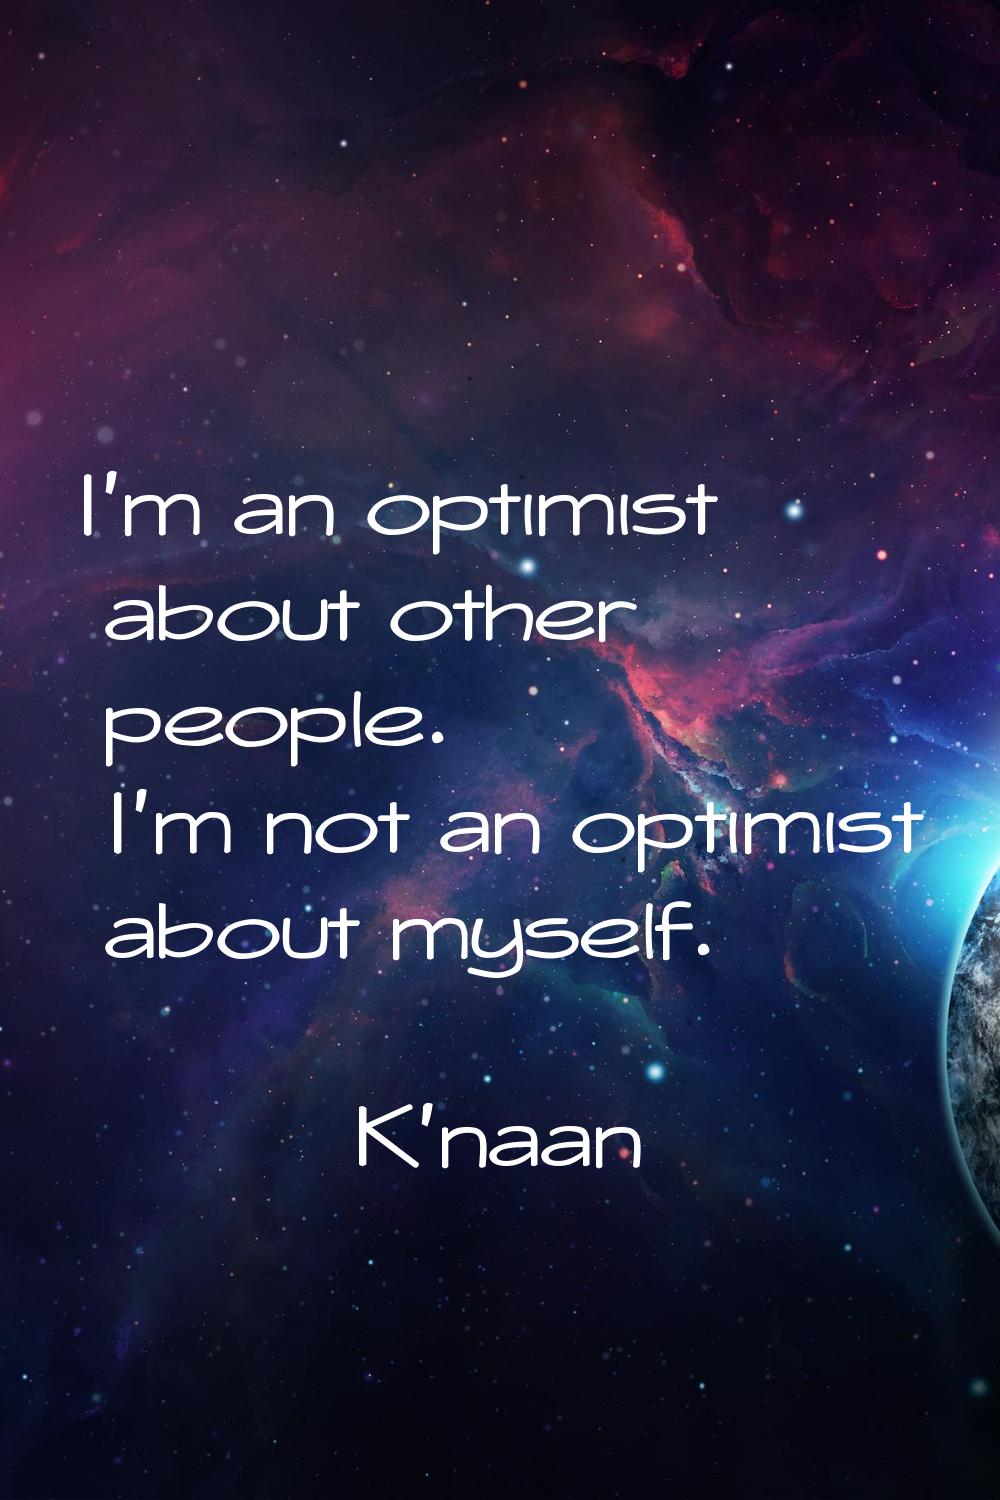 I'm an optimist about other people. I'm not an optimist about myself.